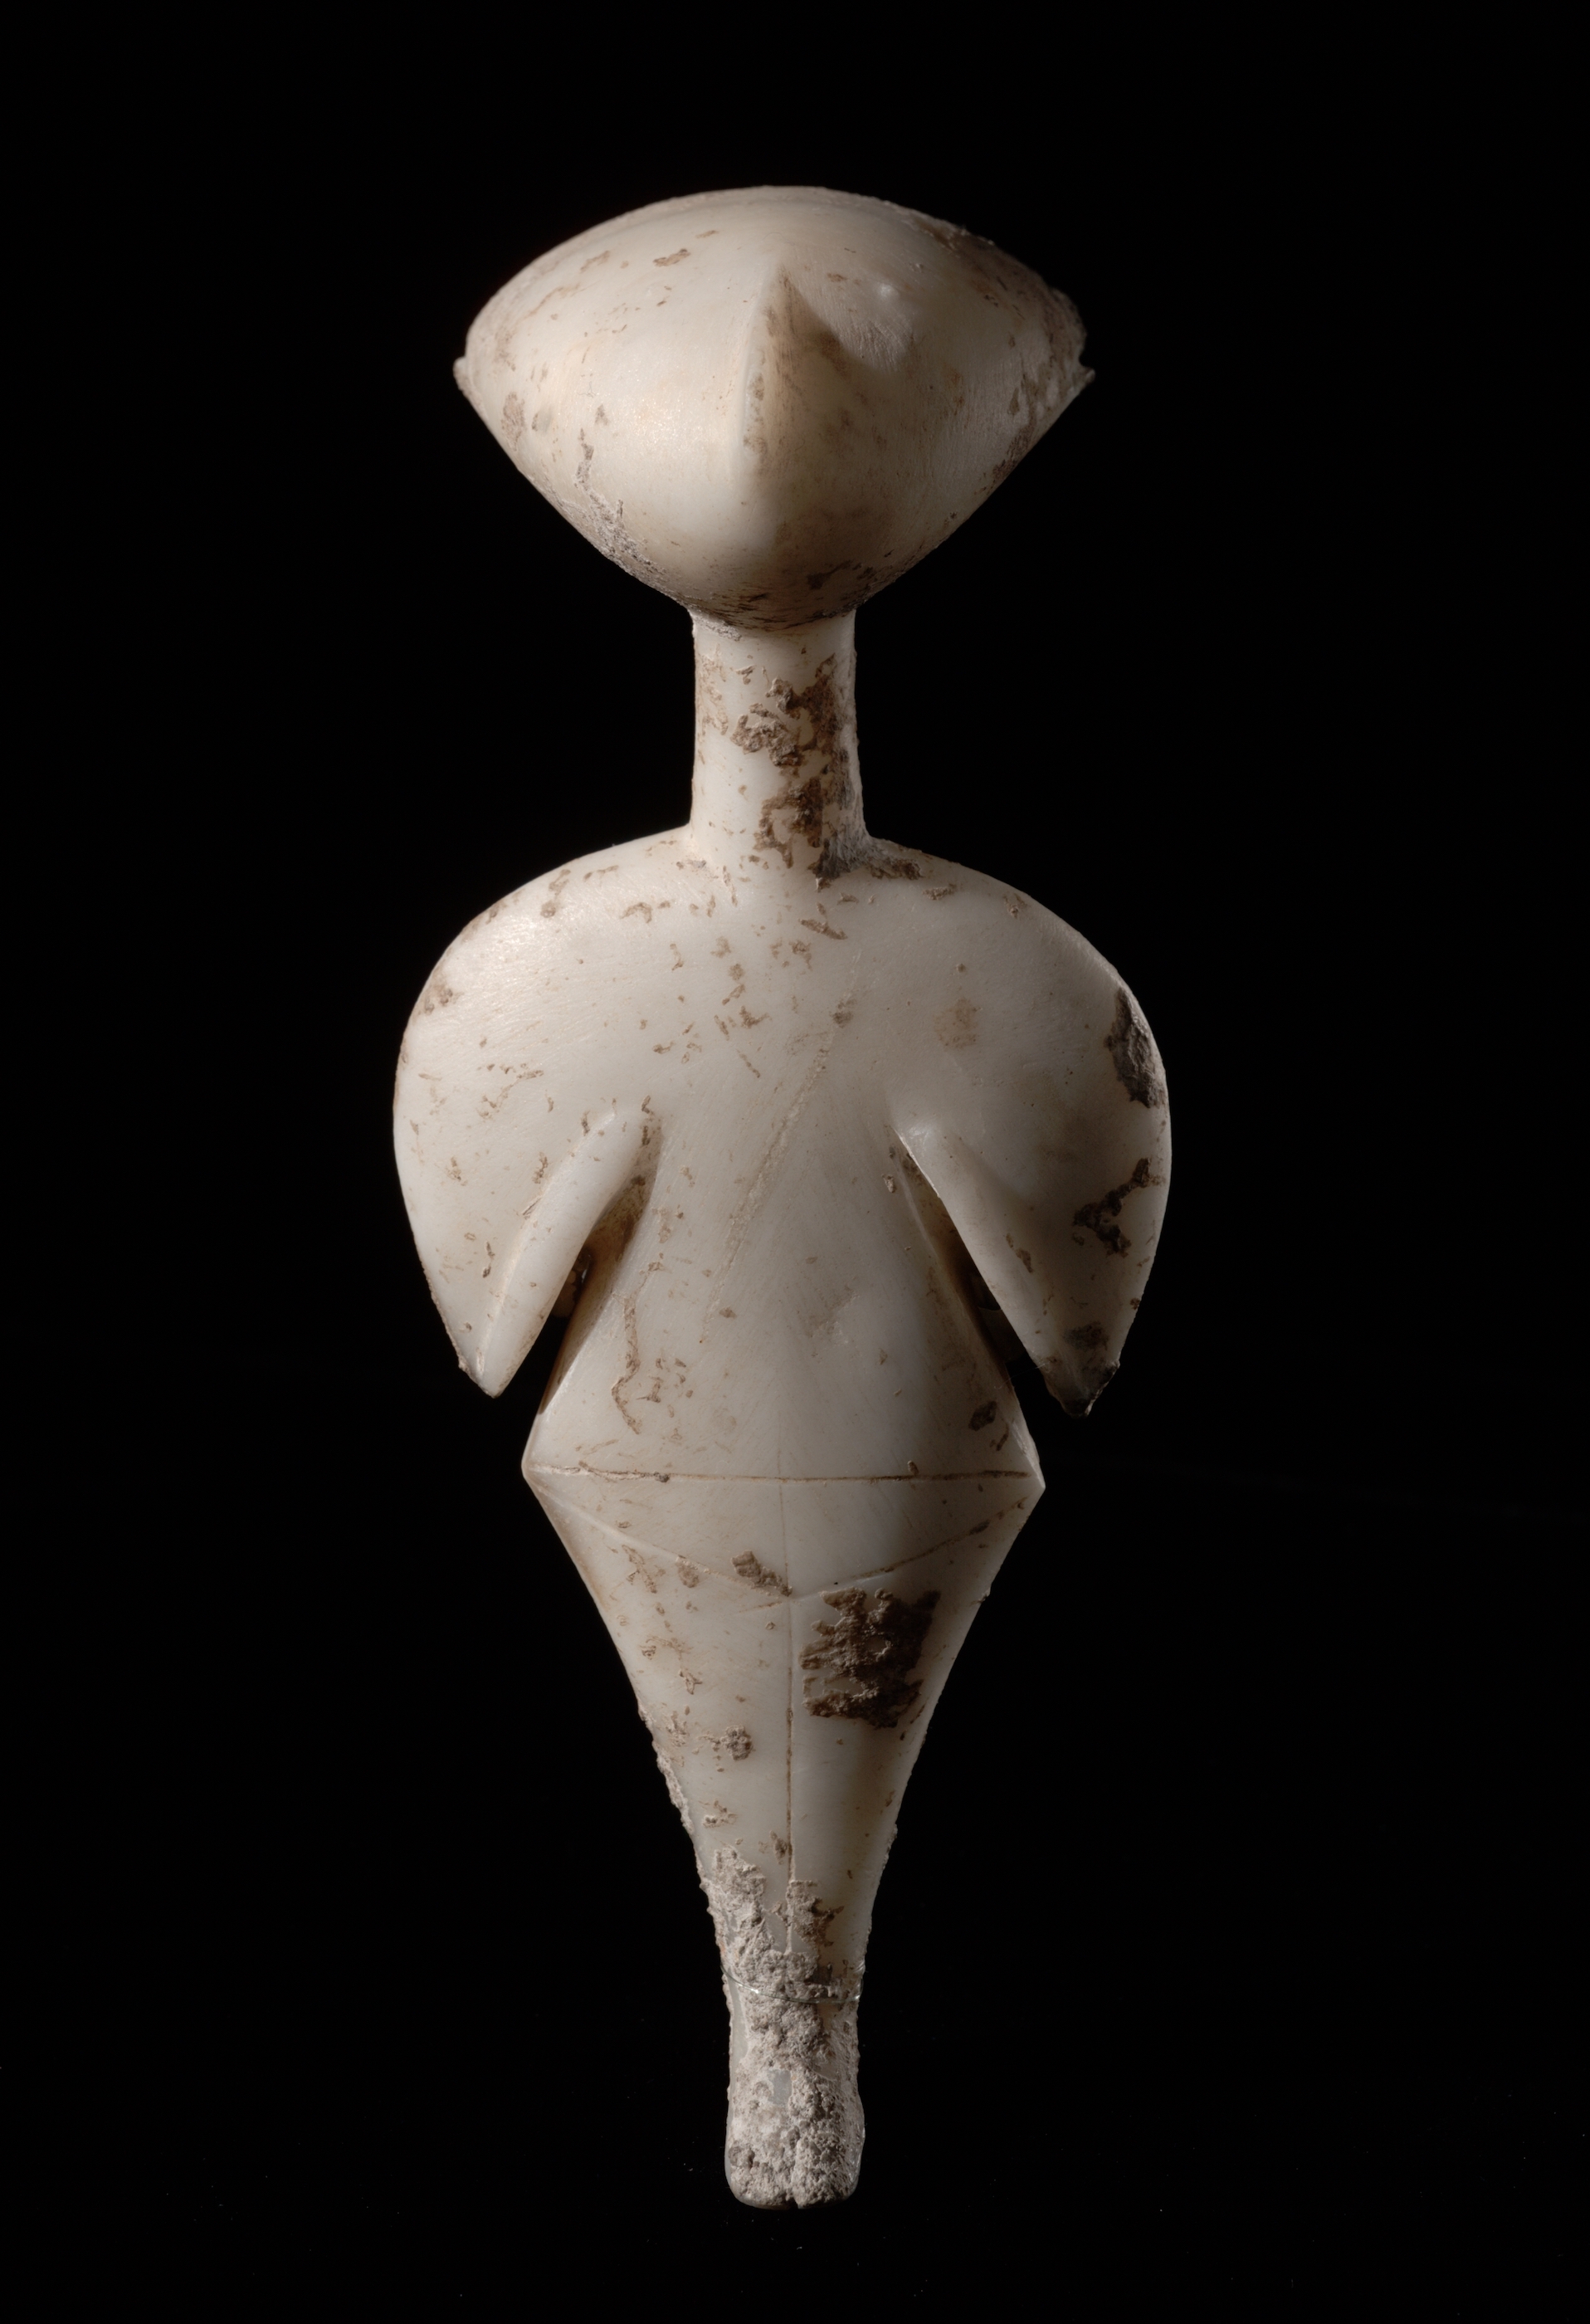 Statuette of a Woman: "The Stargazer" by Unknown Artist - c. 3000 BC - 17.2 x 6.5 x 6.3 cm Cleveland Museum of Art